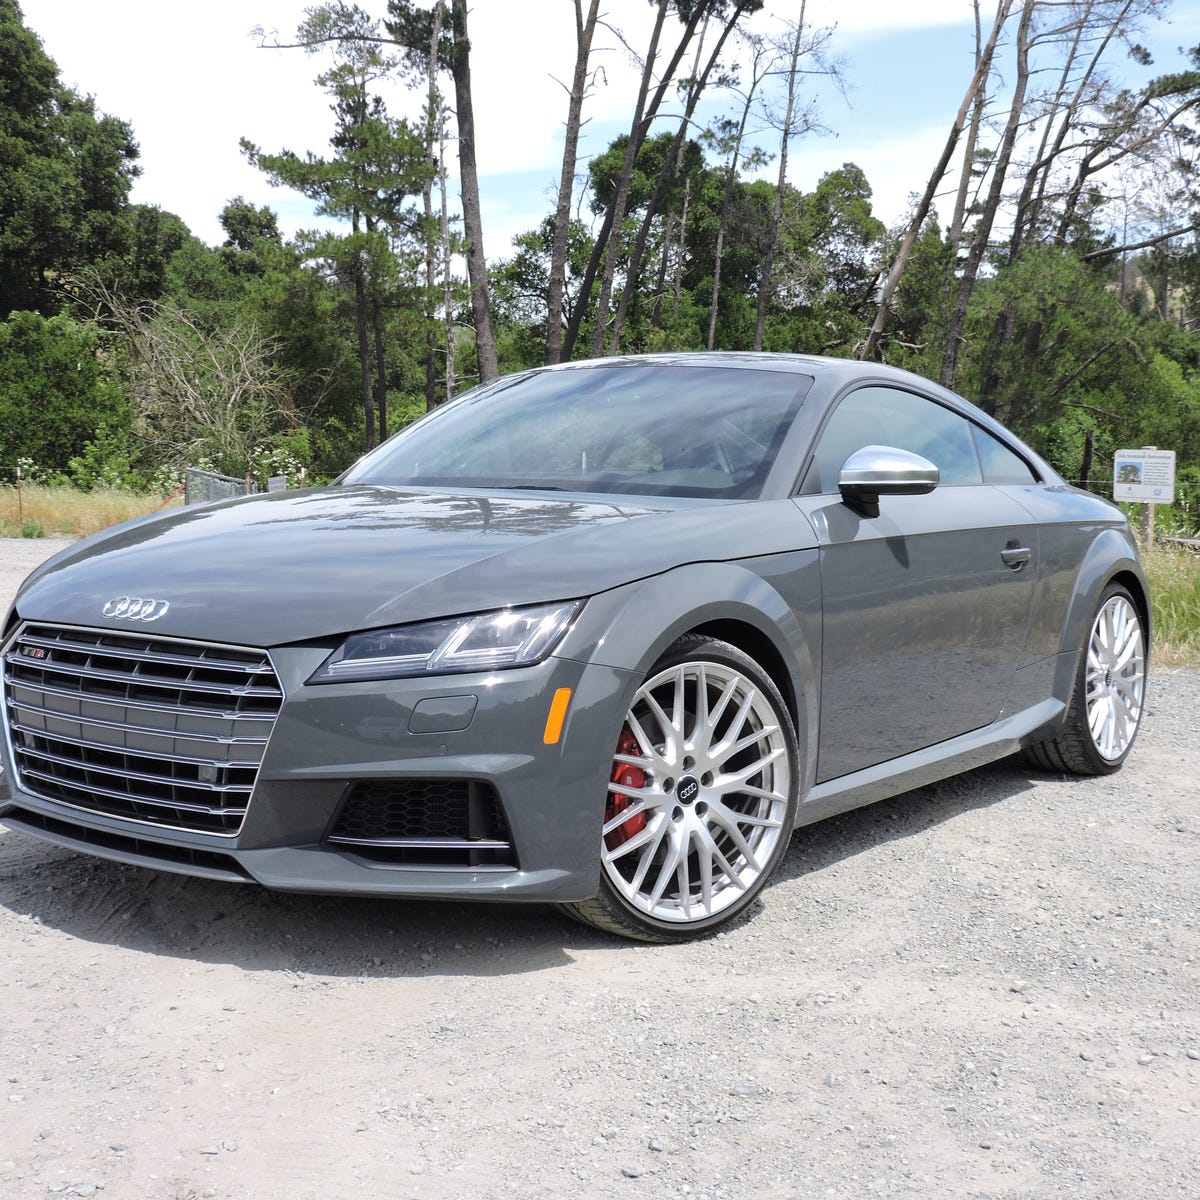 2016 Audi TTS review: 2016 Audi TTS is both aggressive and refined - CNET